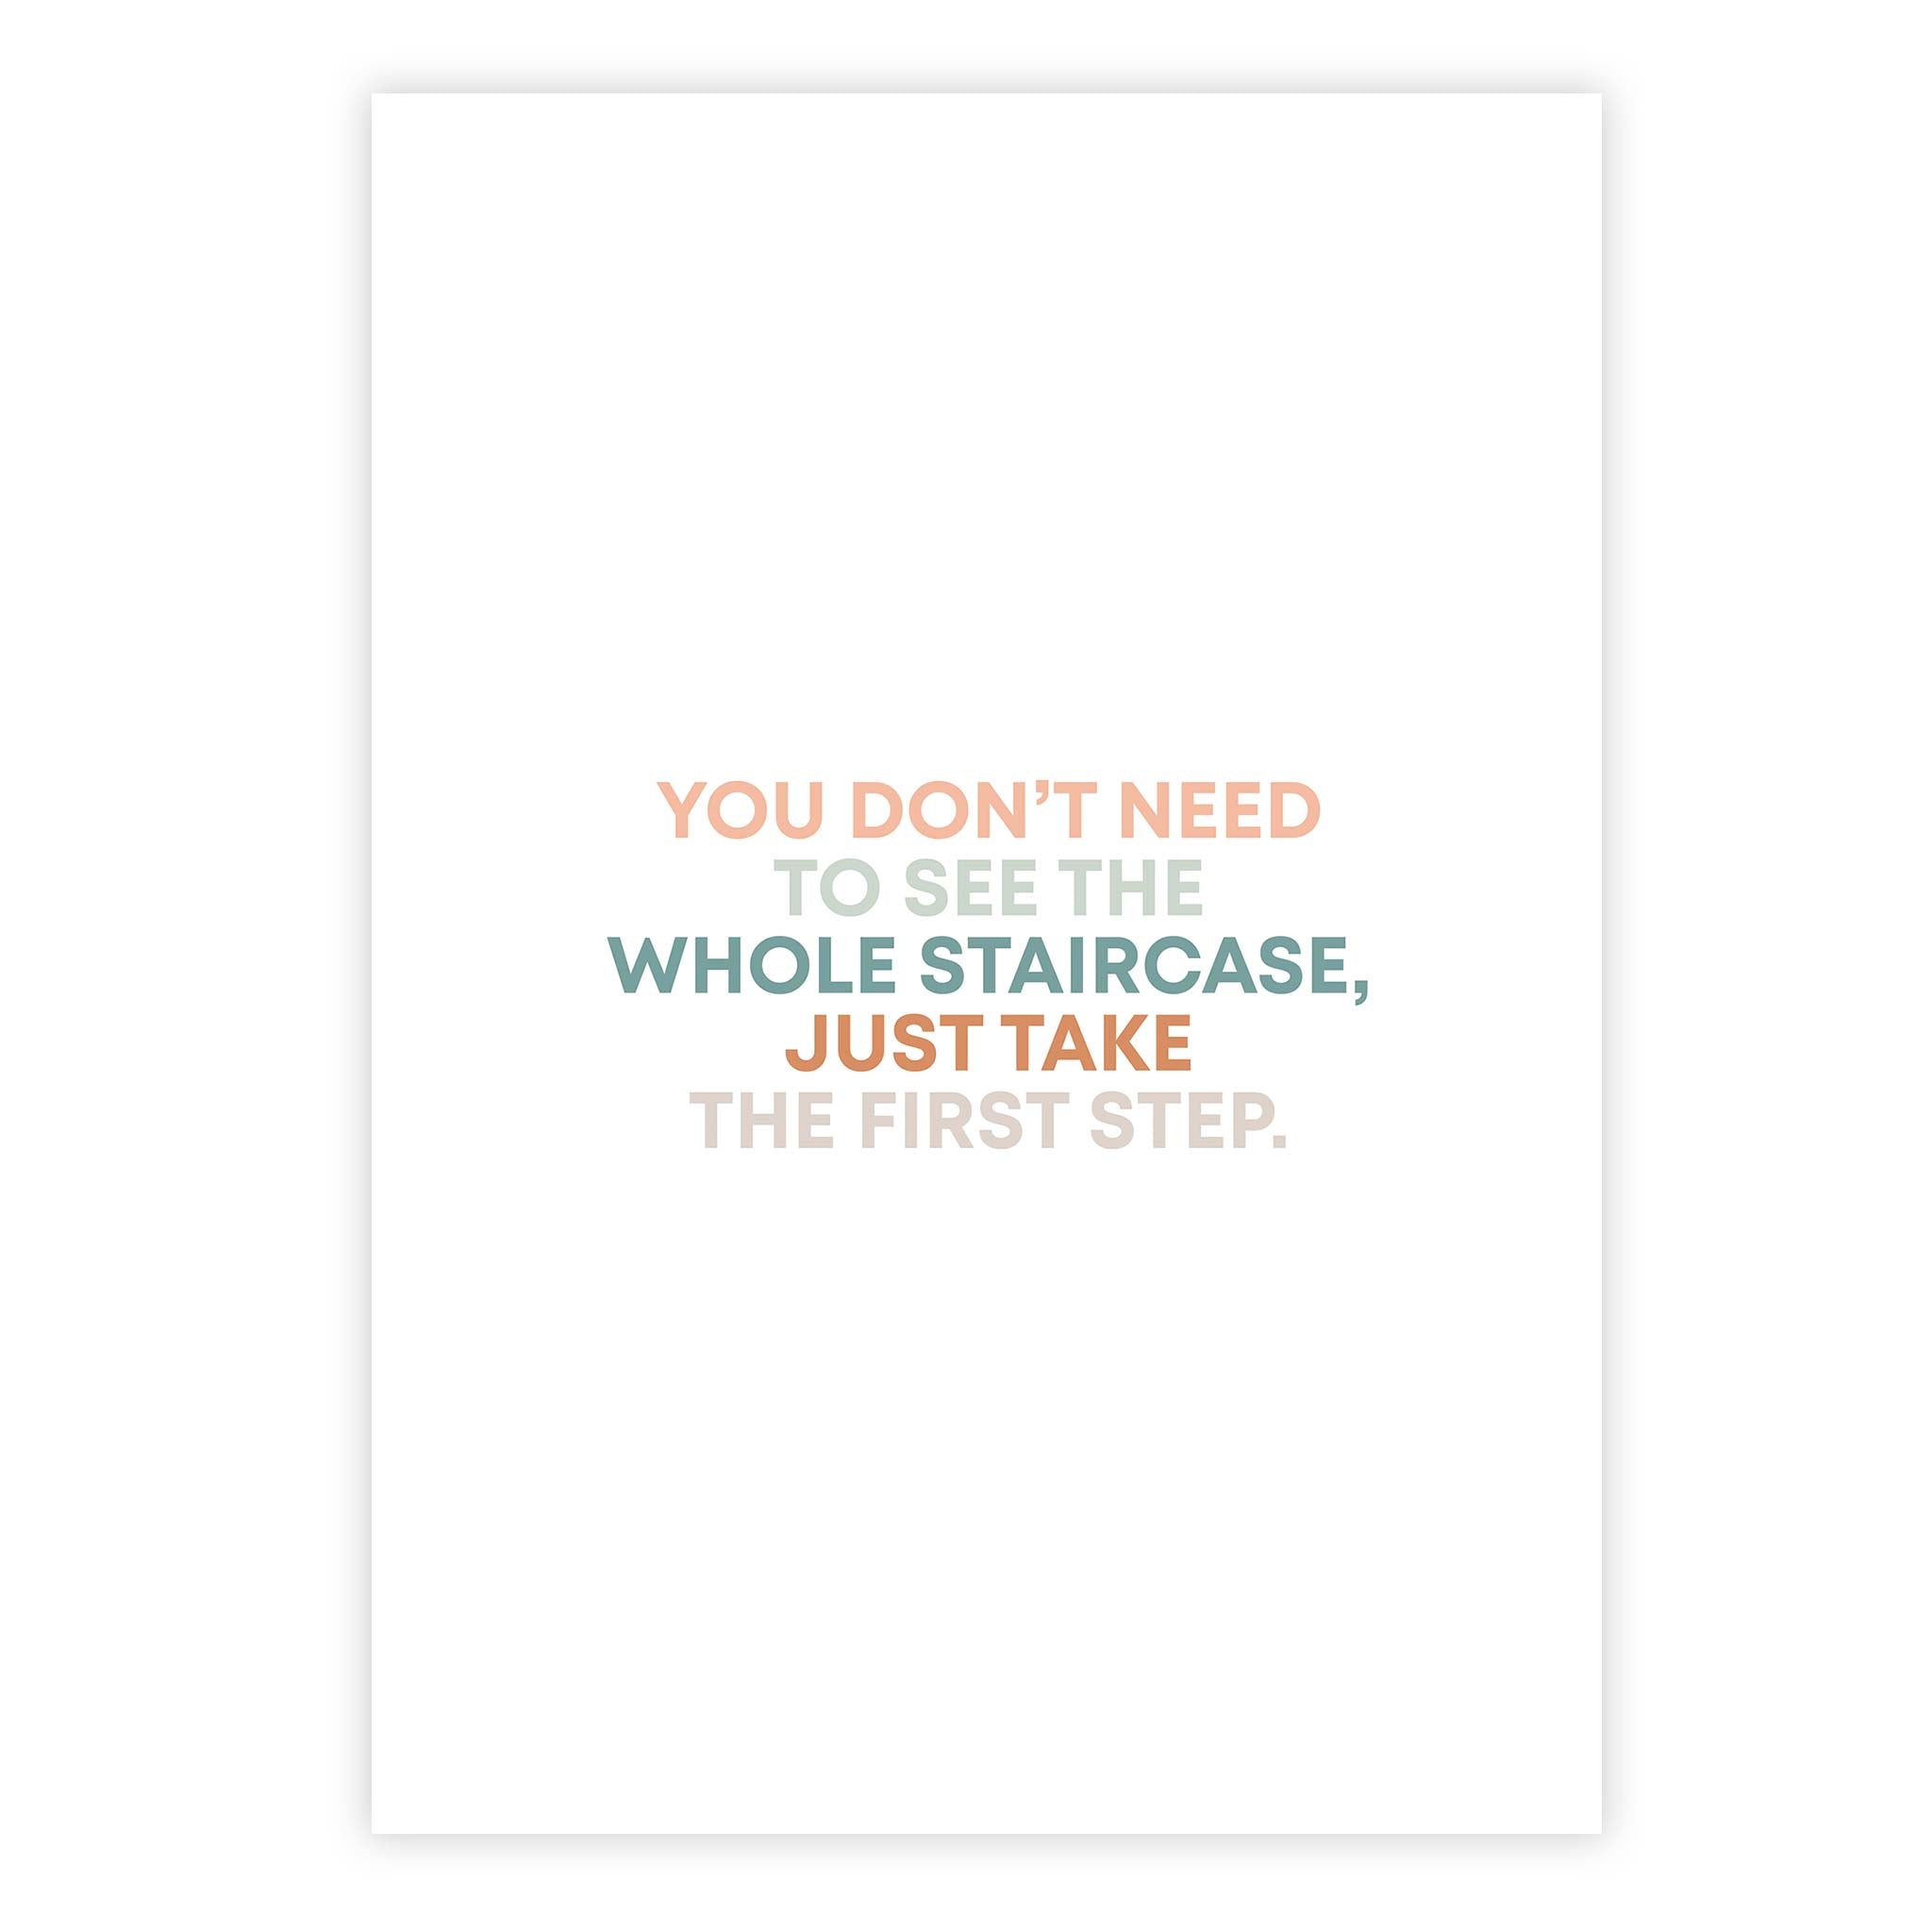 You don’t need to see the whole staircase, just take the first step